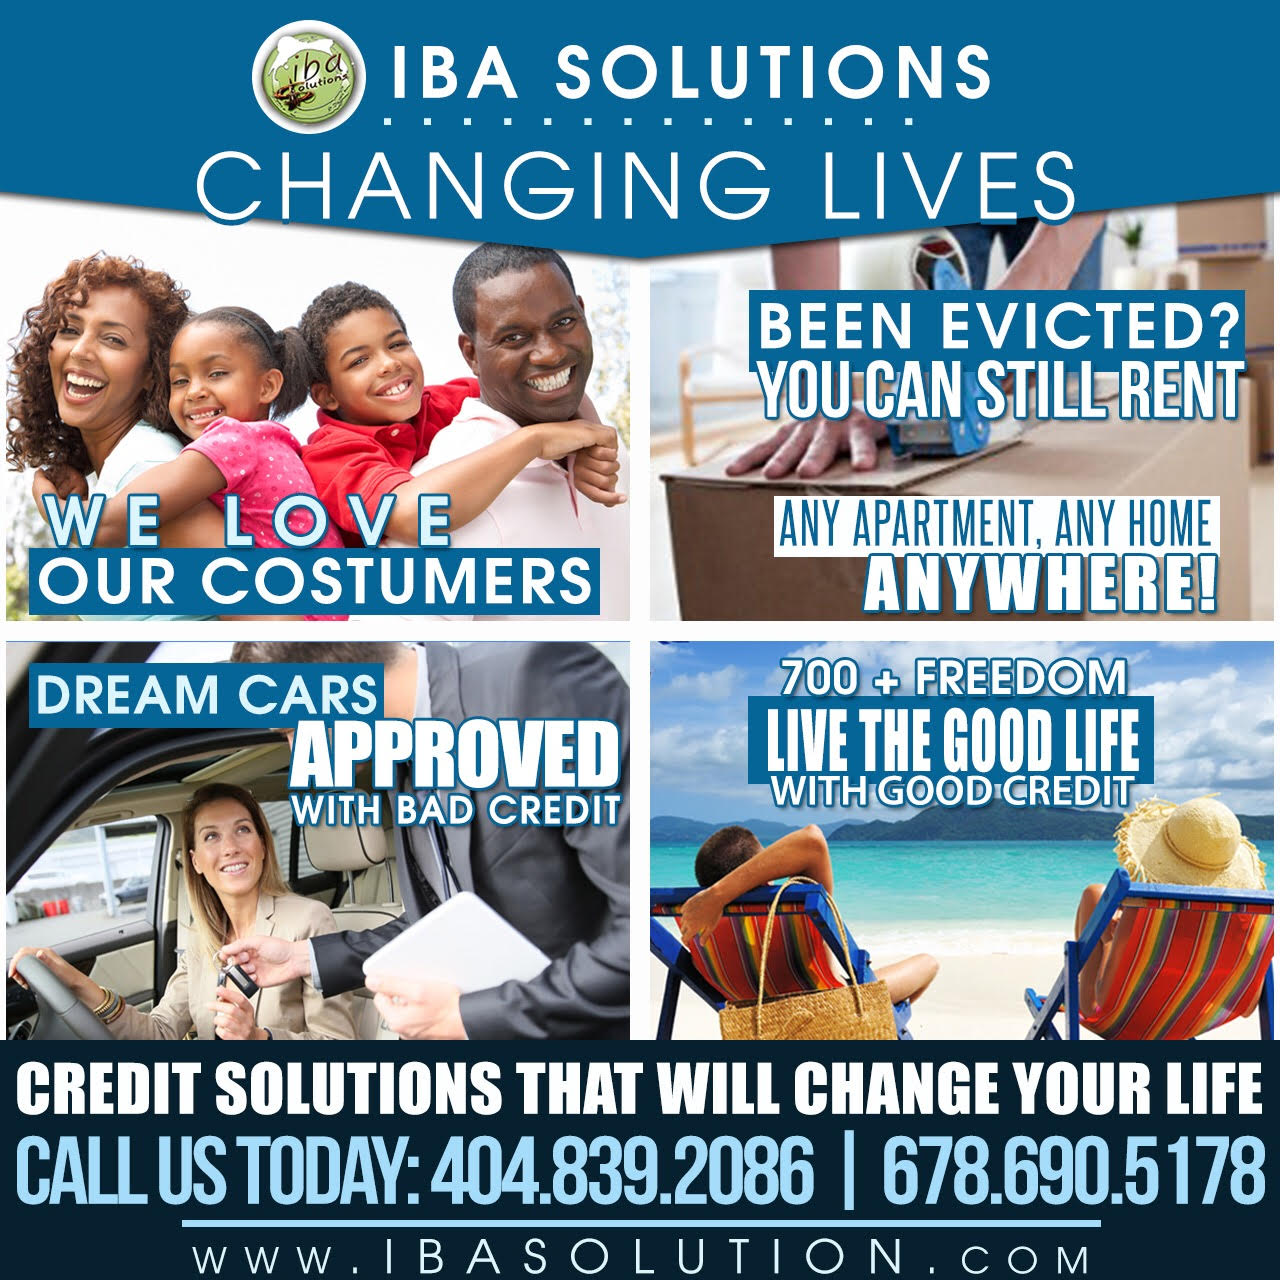 IBA Ad promising to change lives with services